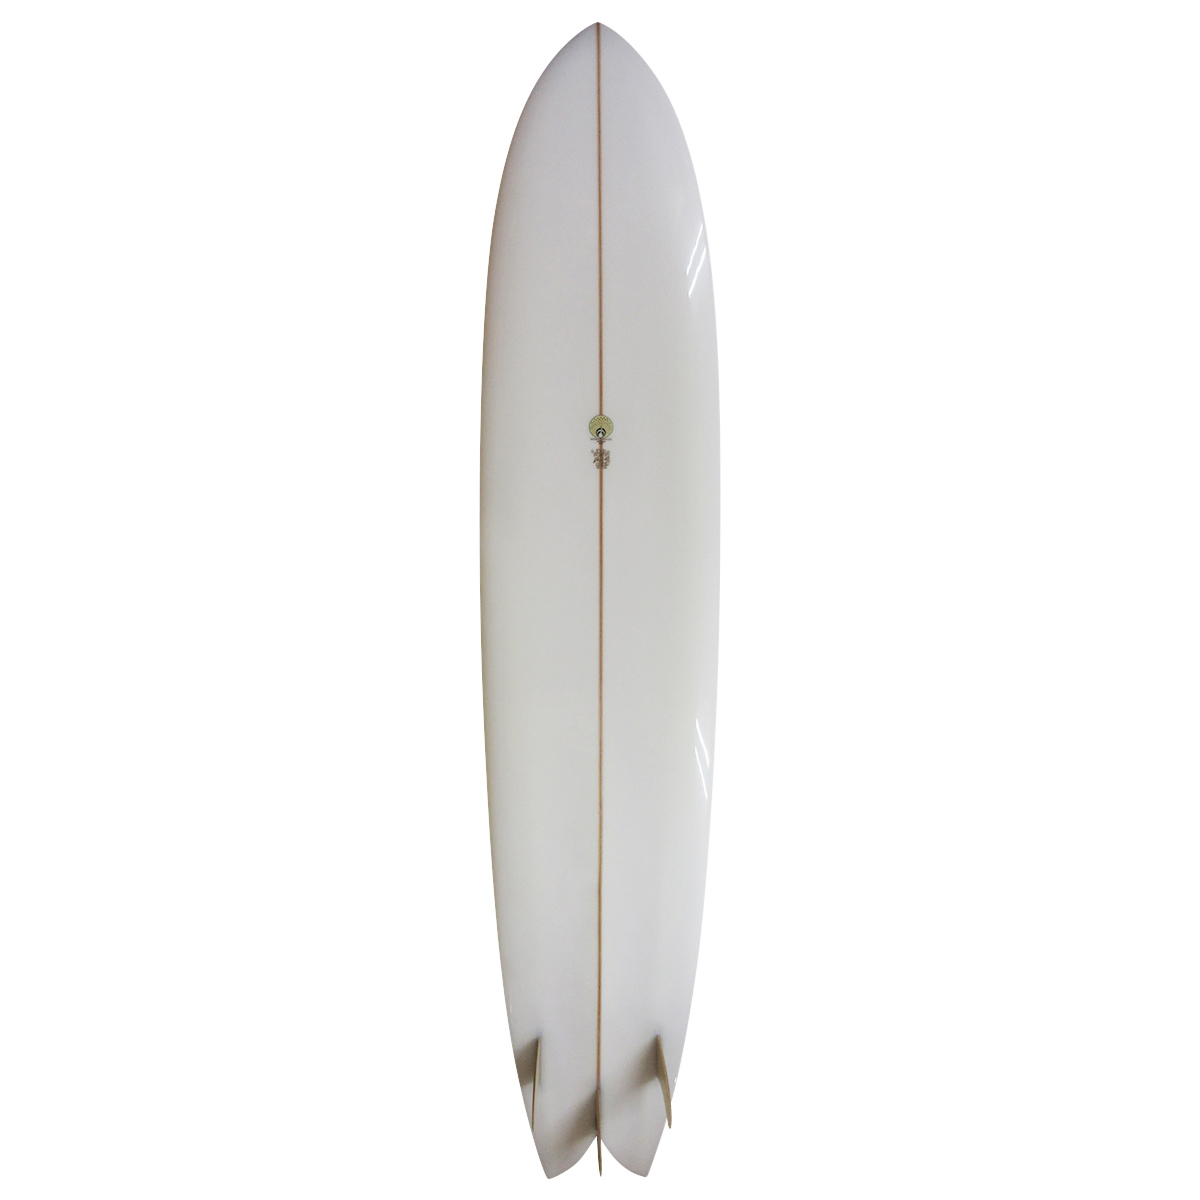 MICHAEL MILLER SURFBOARDS / Fish Simmons 9`6